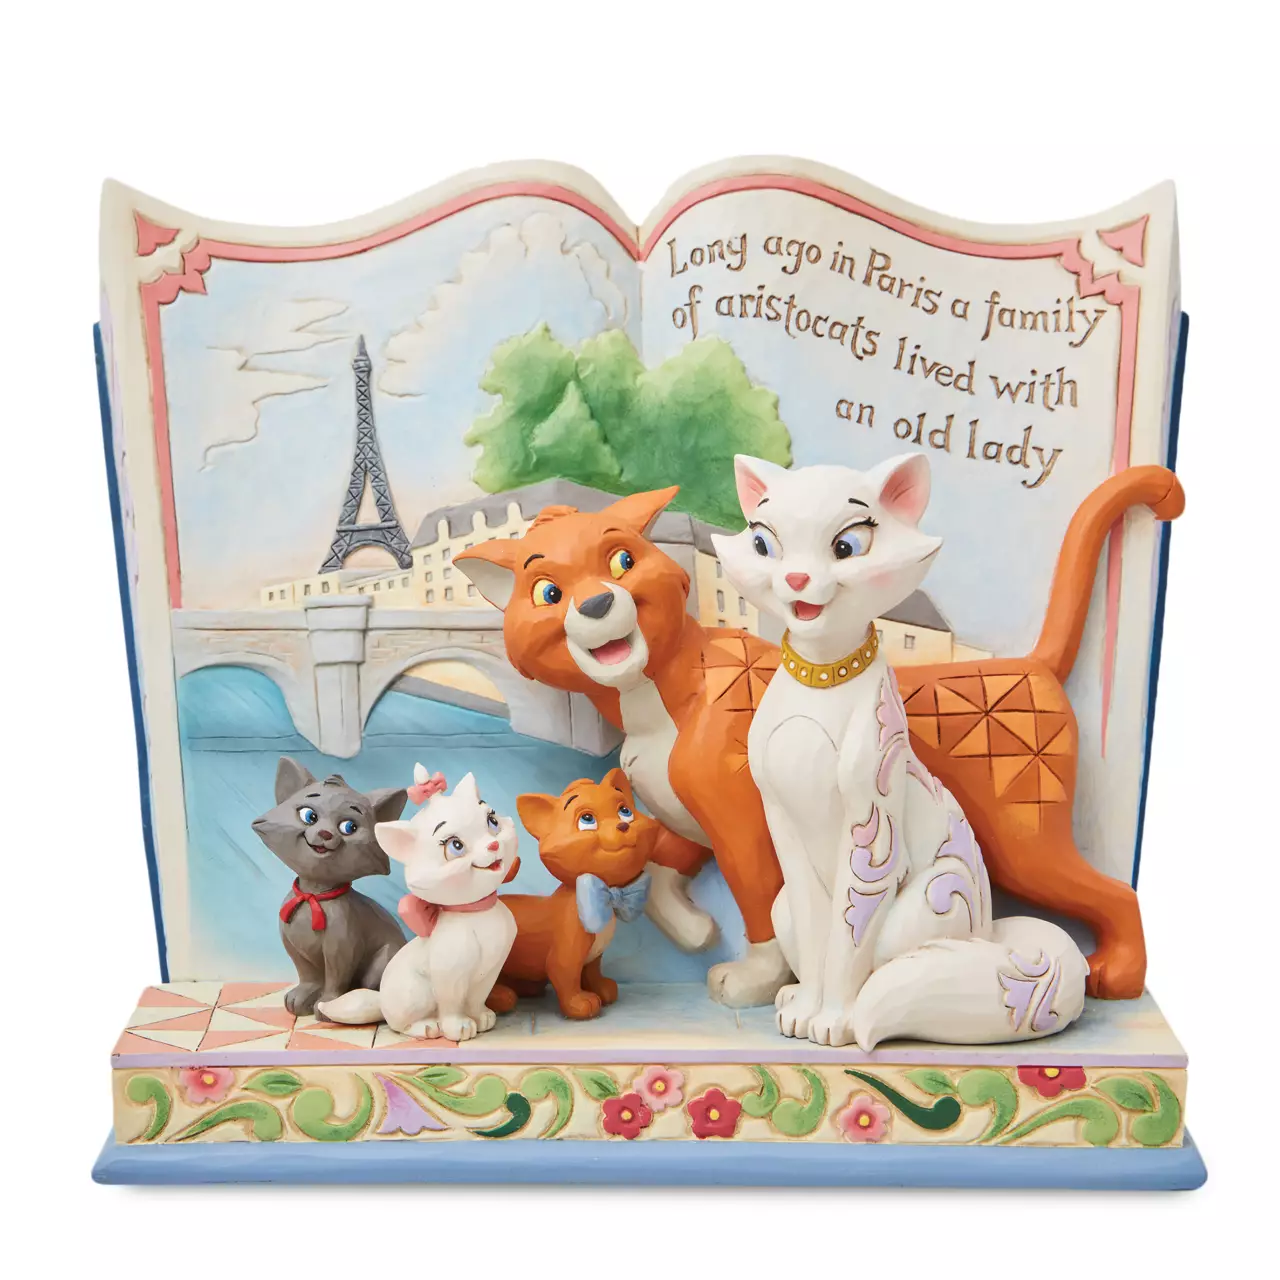 The Aristocats Storybook Figure by Jim Shore